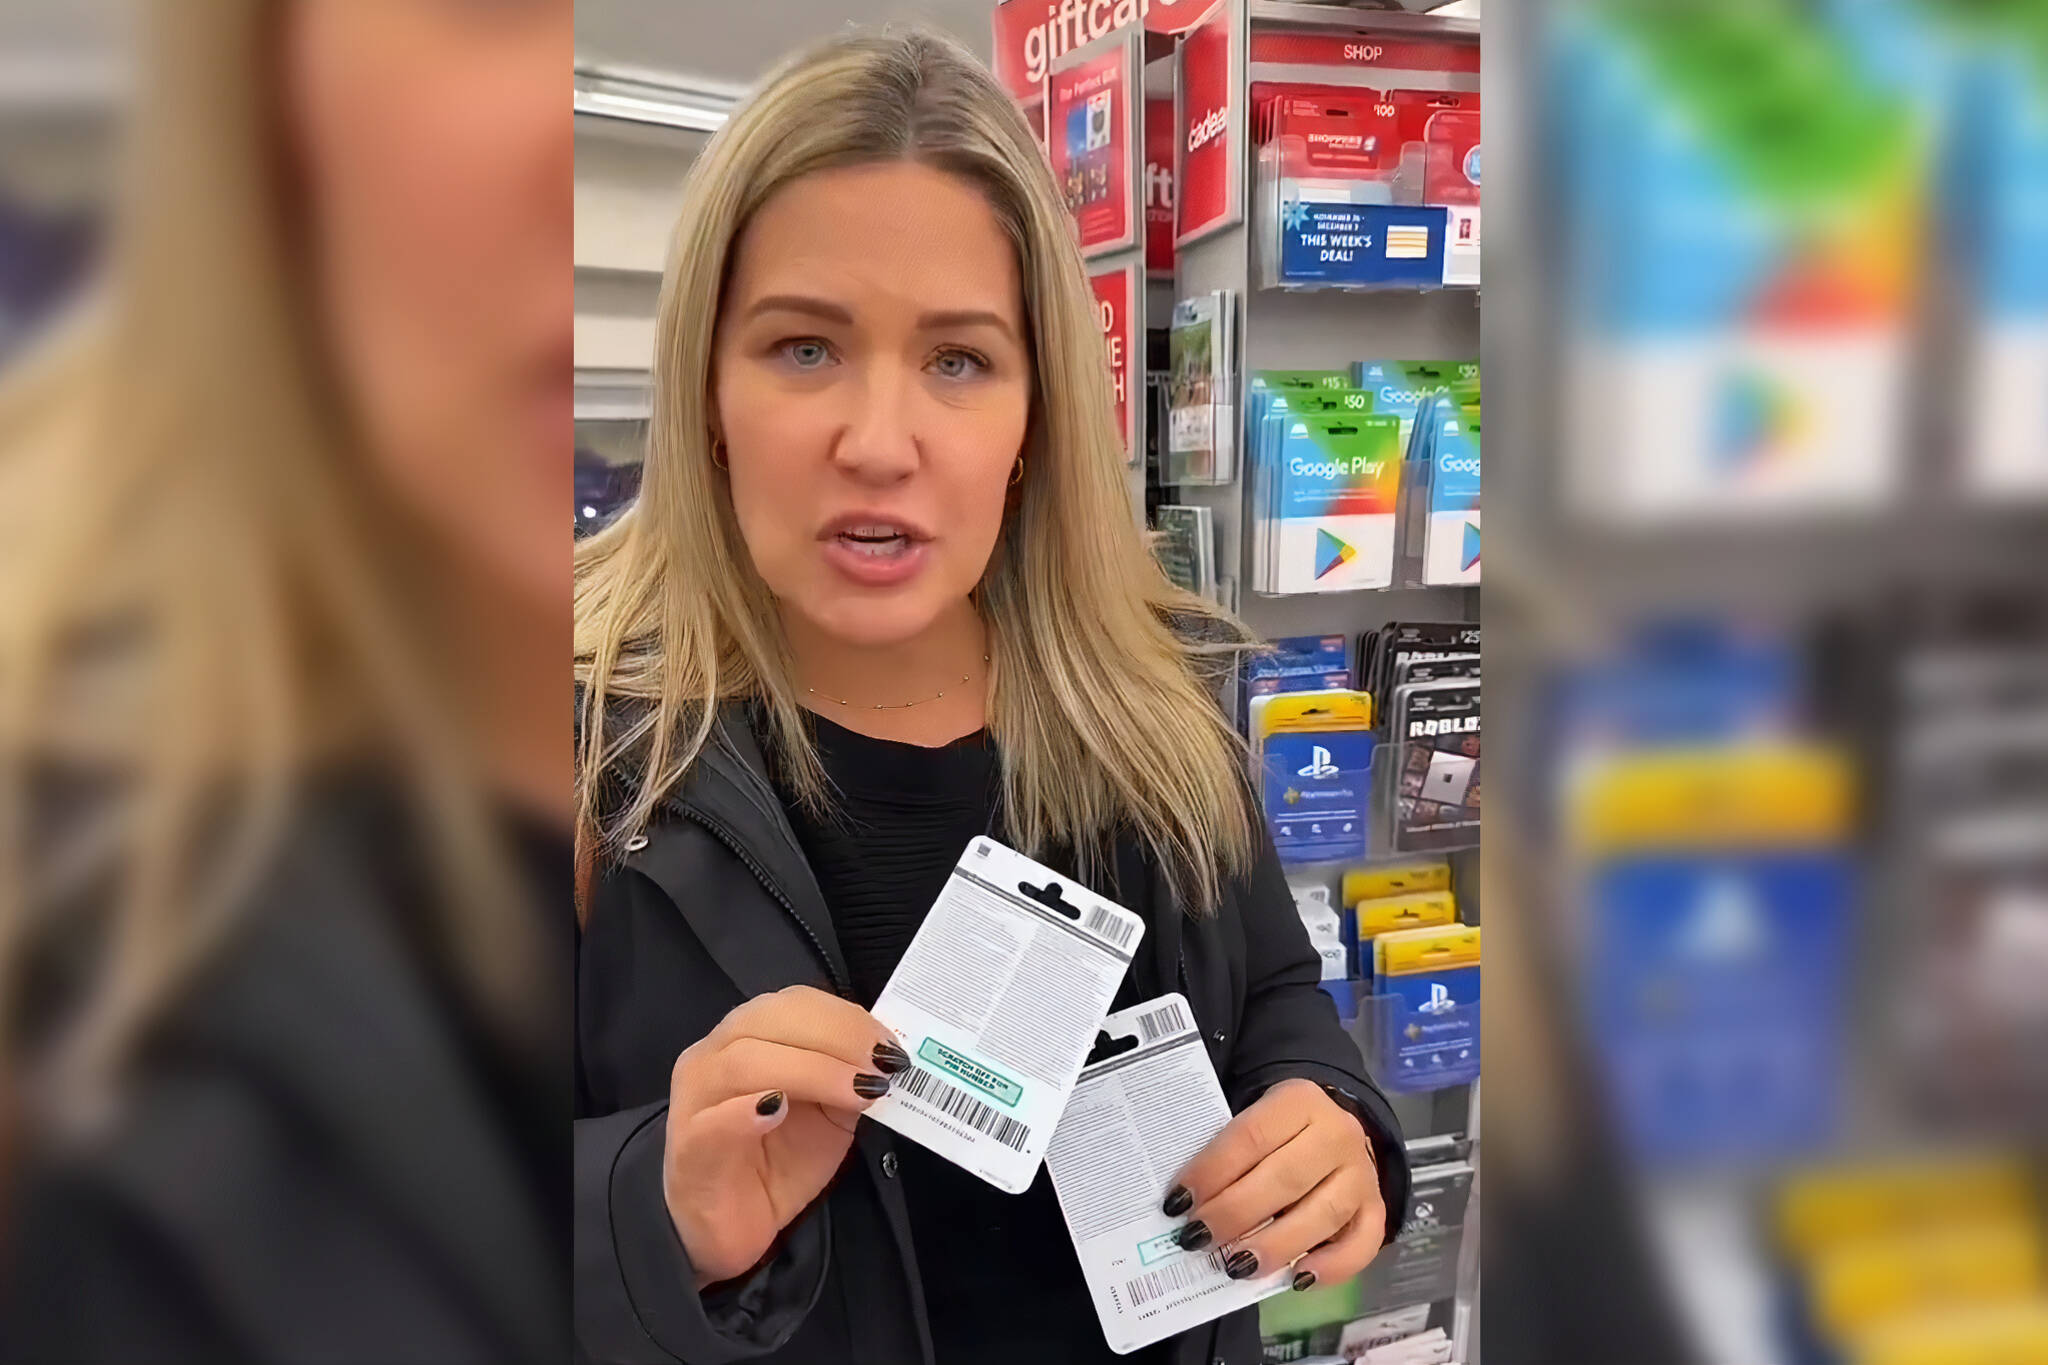 Woman says she was scammed after buying Walmart gift card 